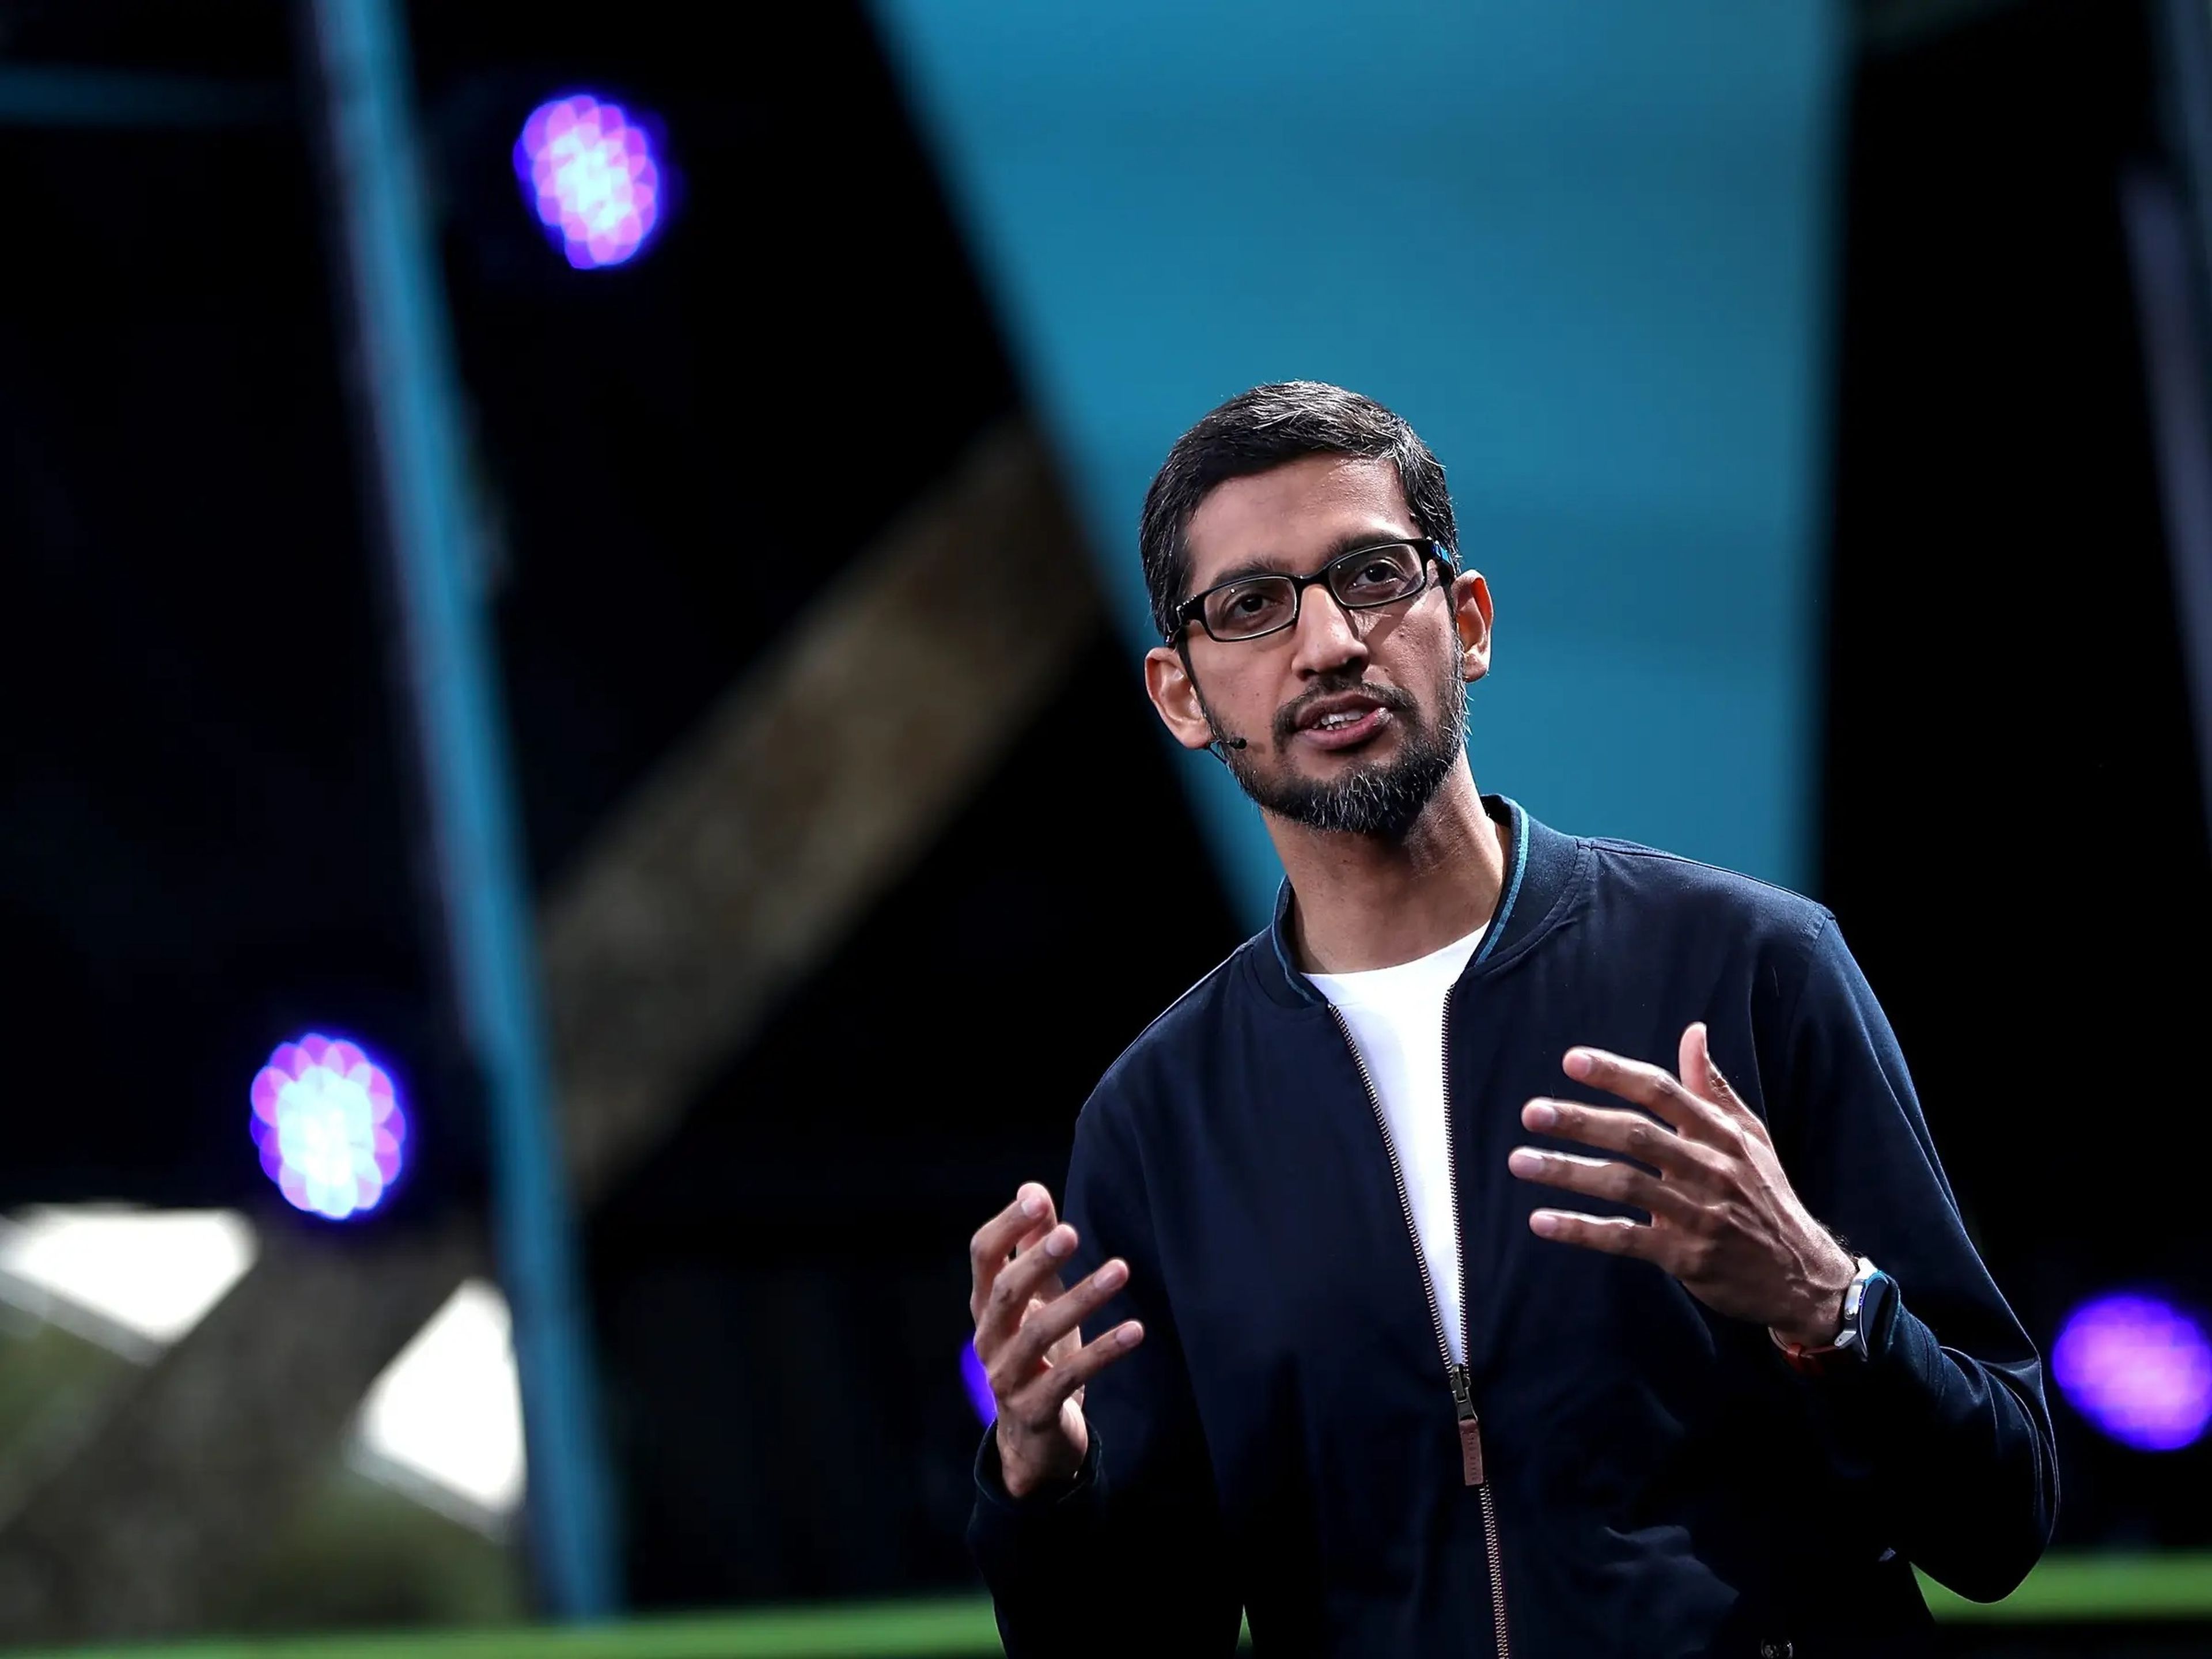 Google CEO Sundar Pichai speaks during Google I/O 2016 at Shoreline Amphitheatre on May 19, 2016 in Mountain View, California. The annual Google I/O conference is runs through May 20.